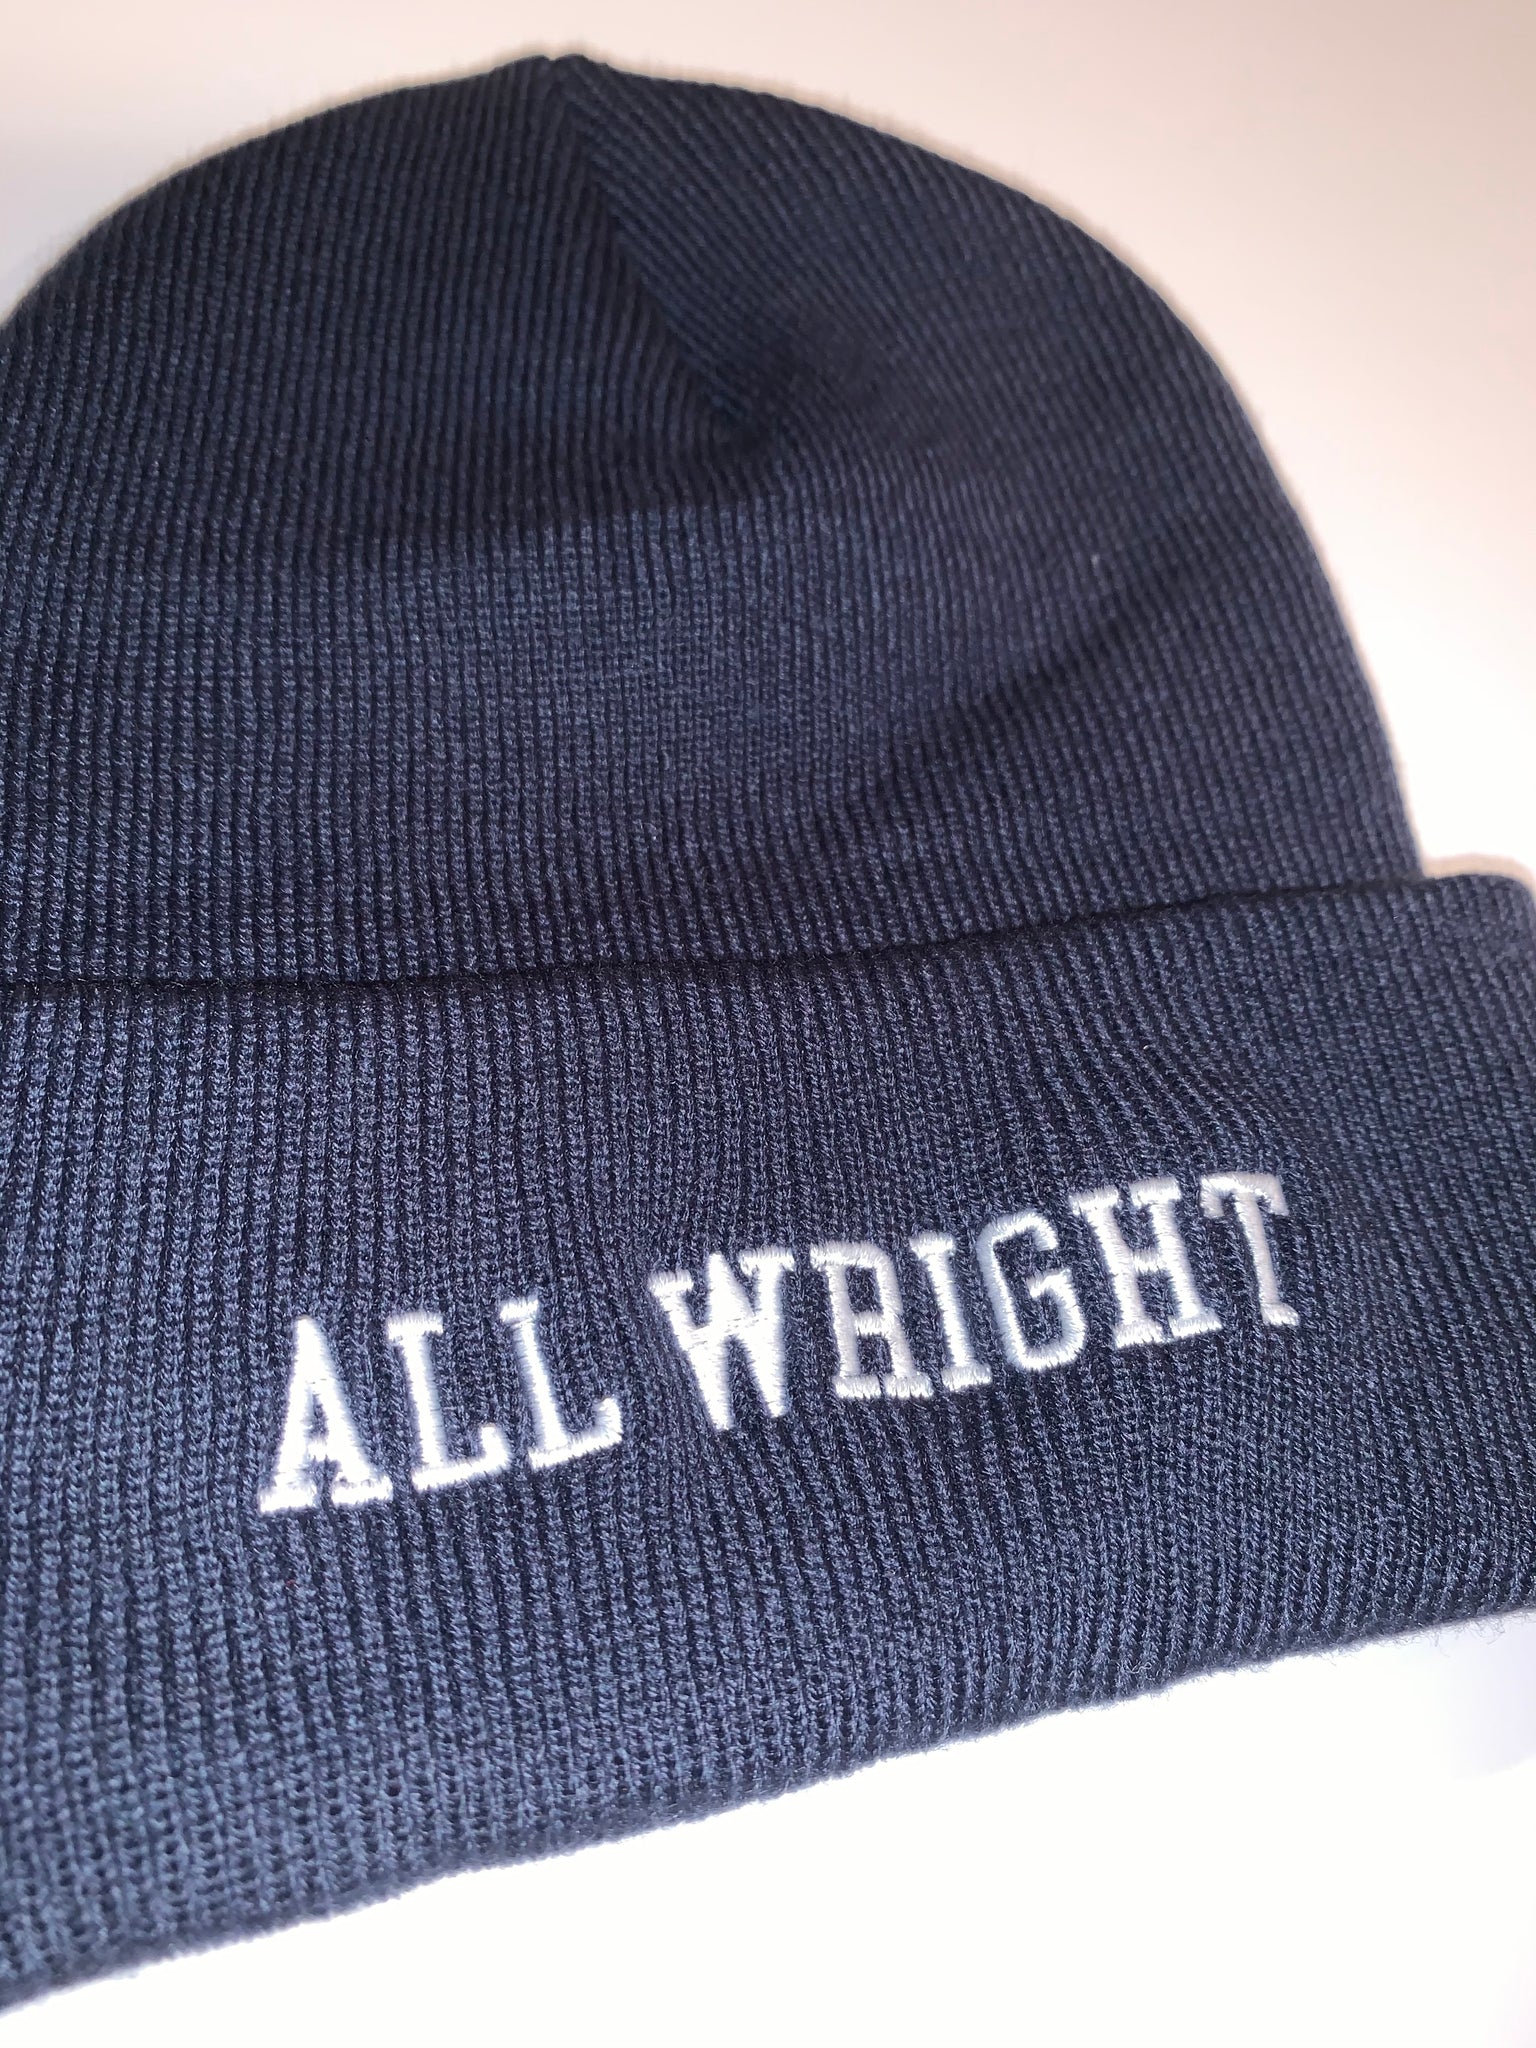 all wright beanie close-up